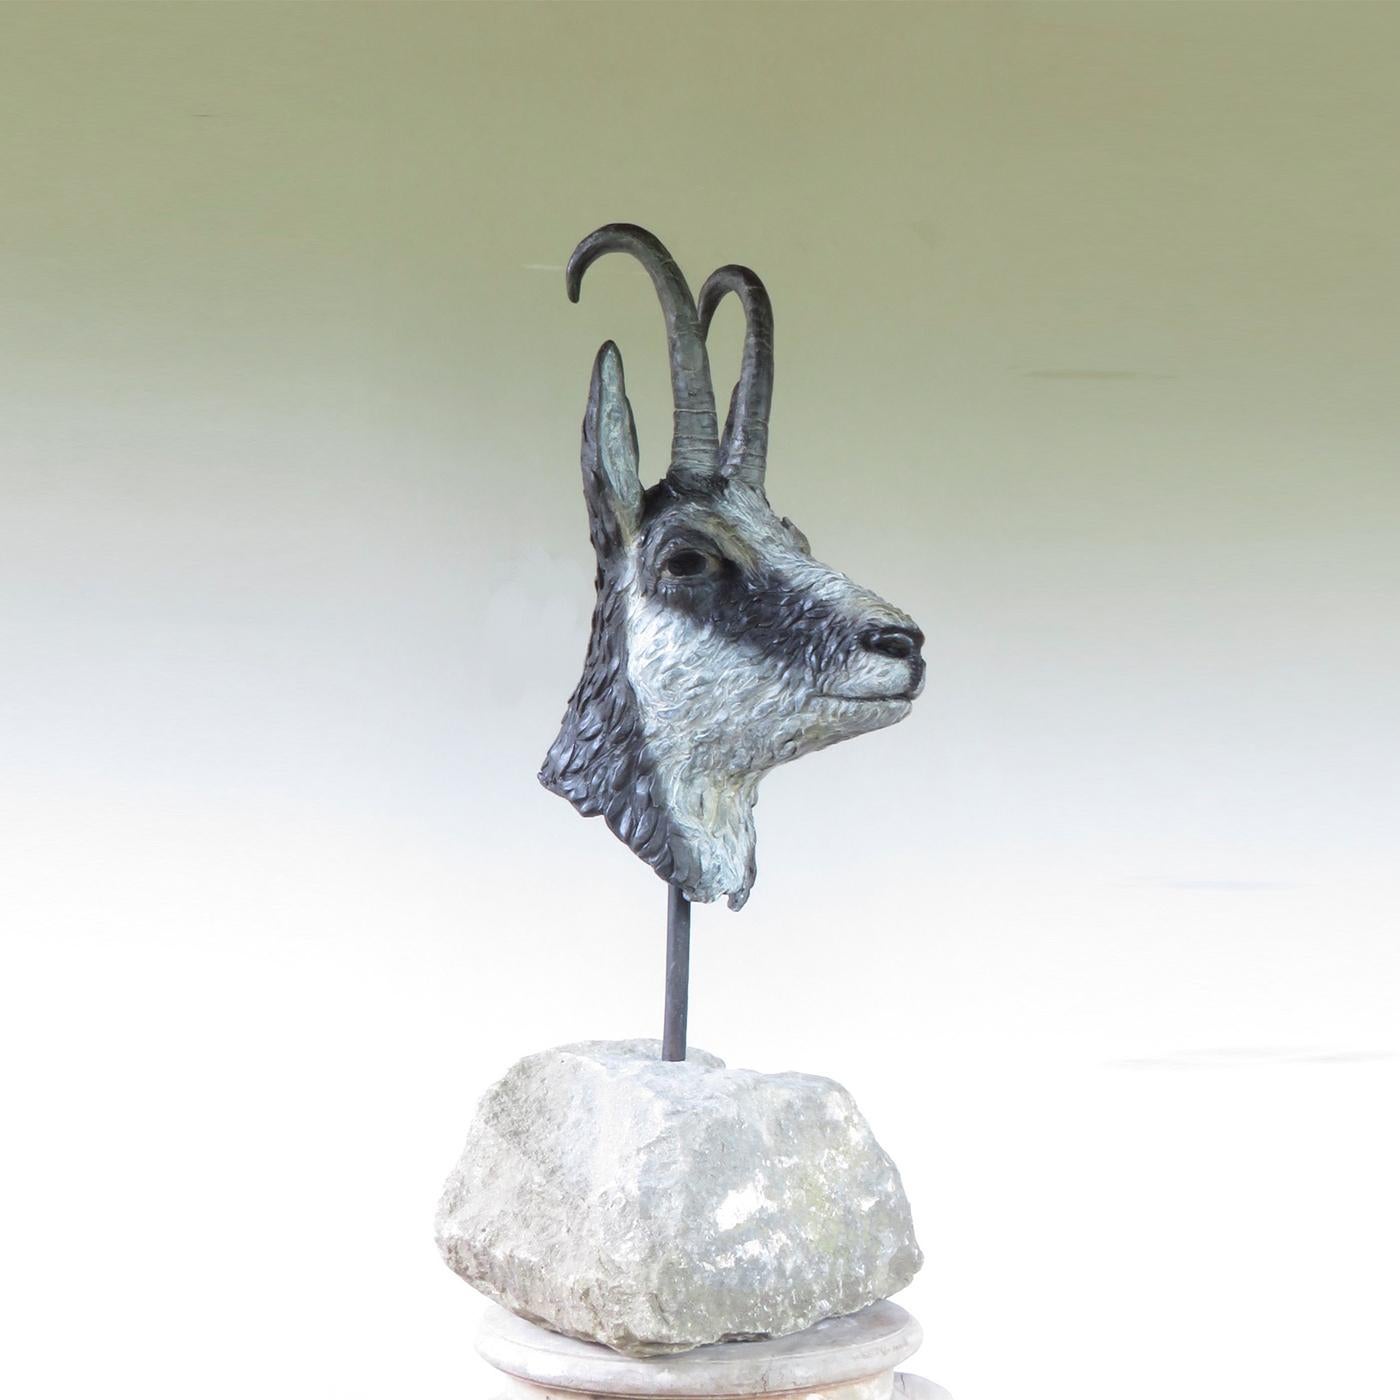 A staple in the Swiss Alps, the chamois is a slender and delicate animal similar to a roe deer. A naturalistic version of its head was exquisitely modelled by Vincenzo Romanelli in 2016 and then cast in bronze using the lost-wax technique. The